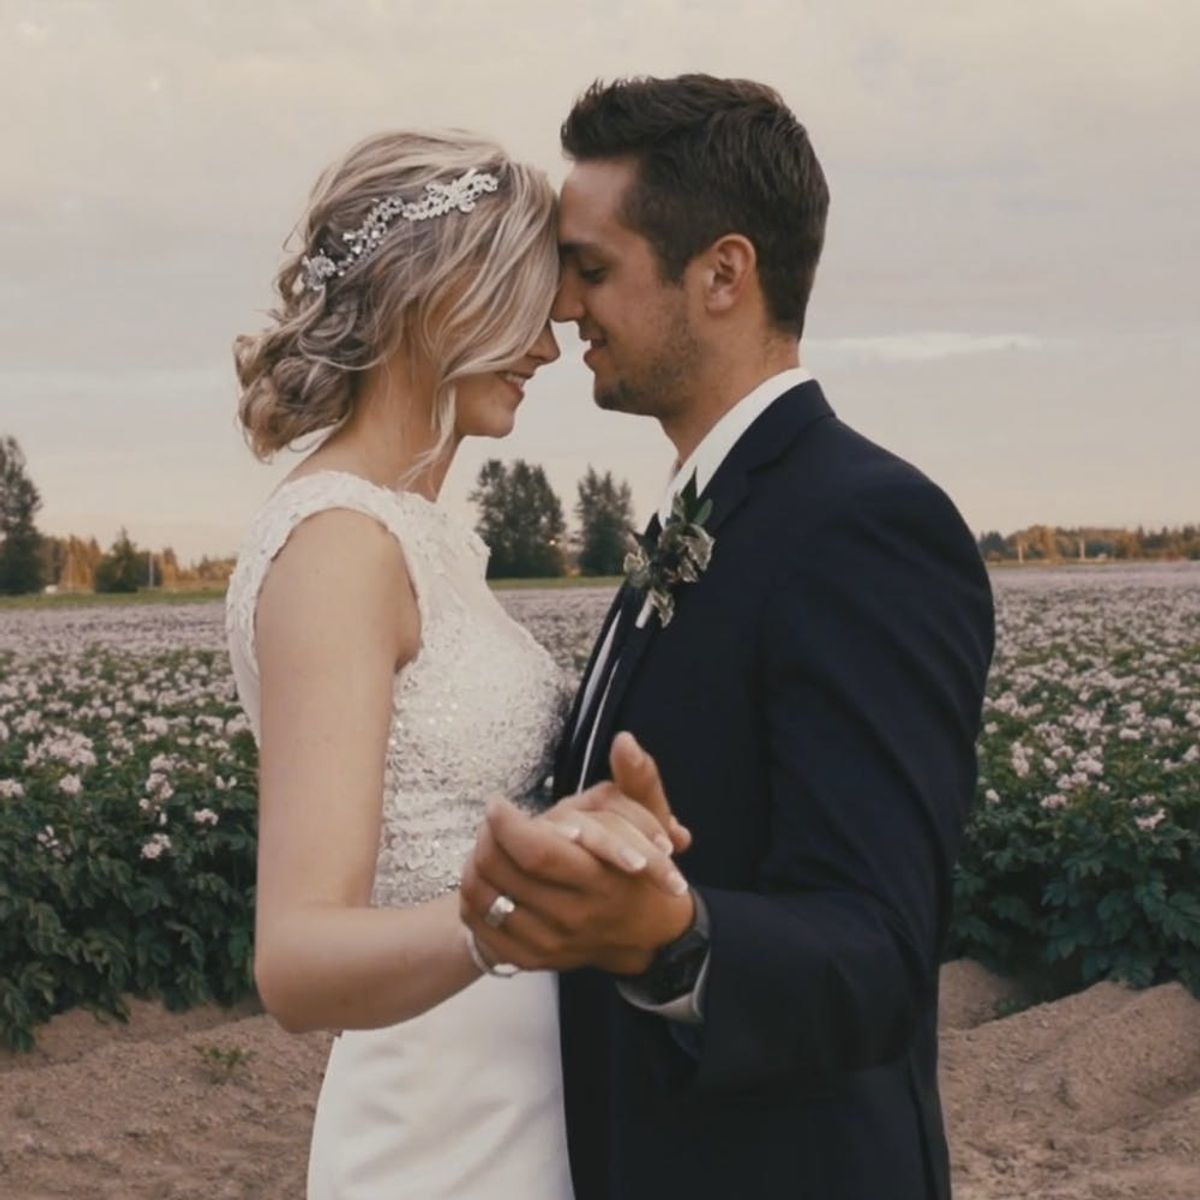 This Rustic-Glam Wedding Is Straight Out of Your Fave Movie